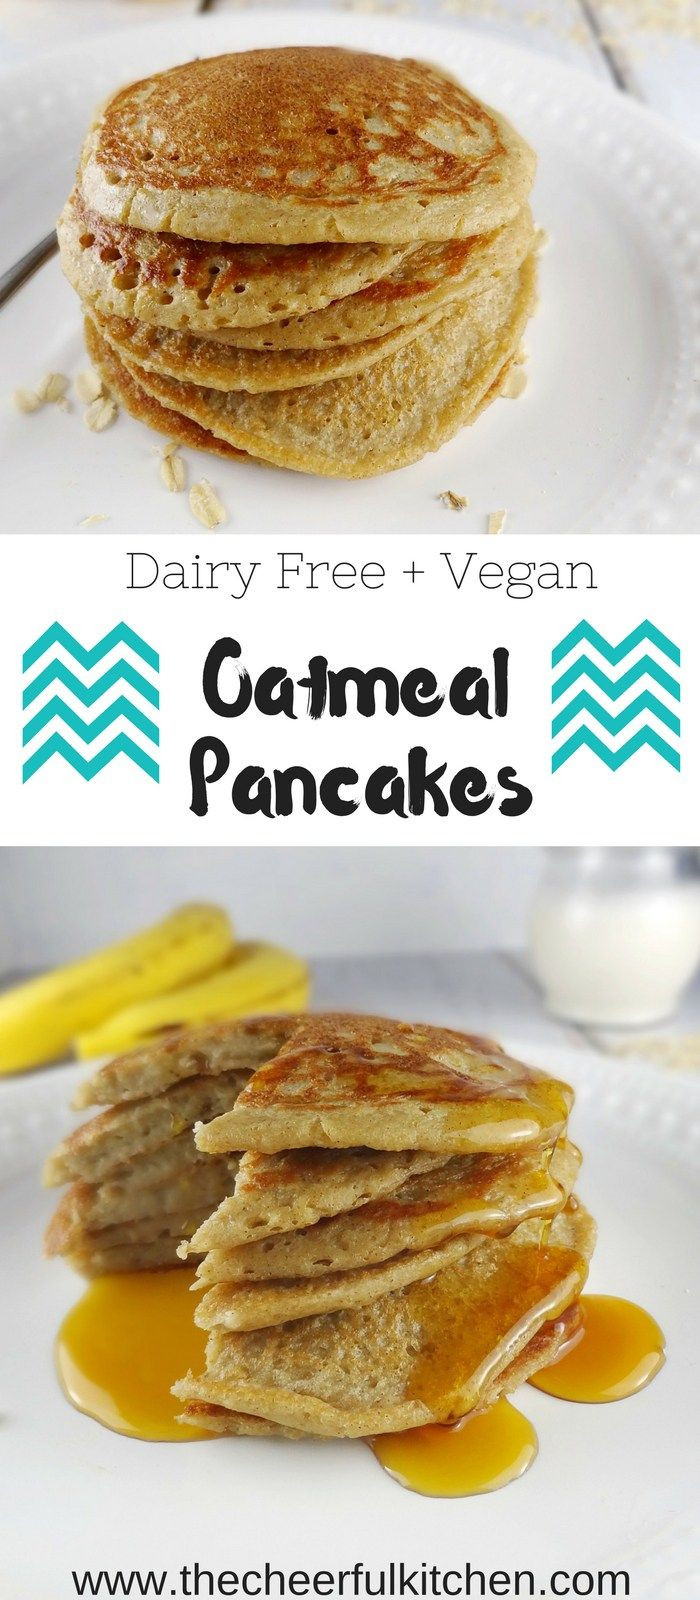 Oatmeal Pancakes Vegan
 Oatmeal Pancakes that are Vegan and Dairy Free These